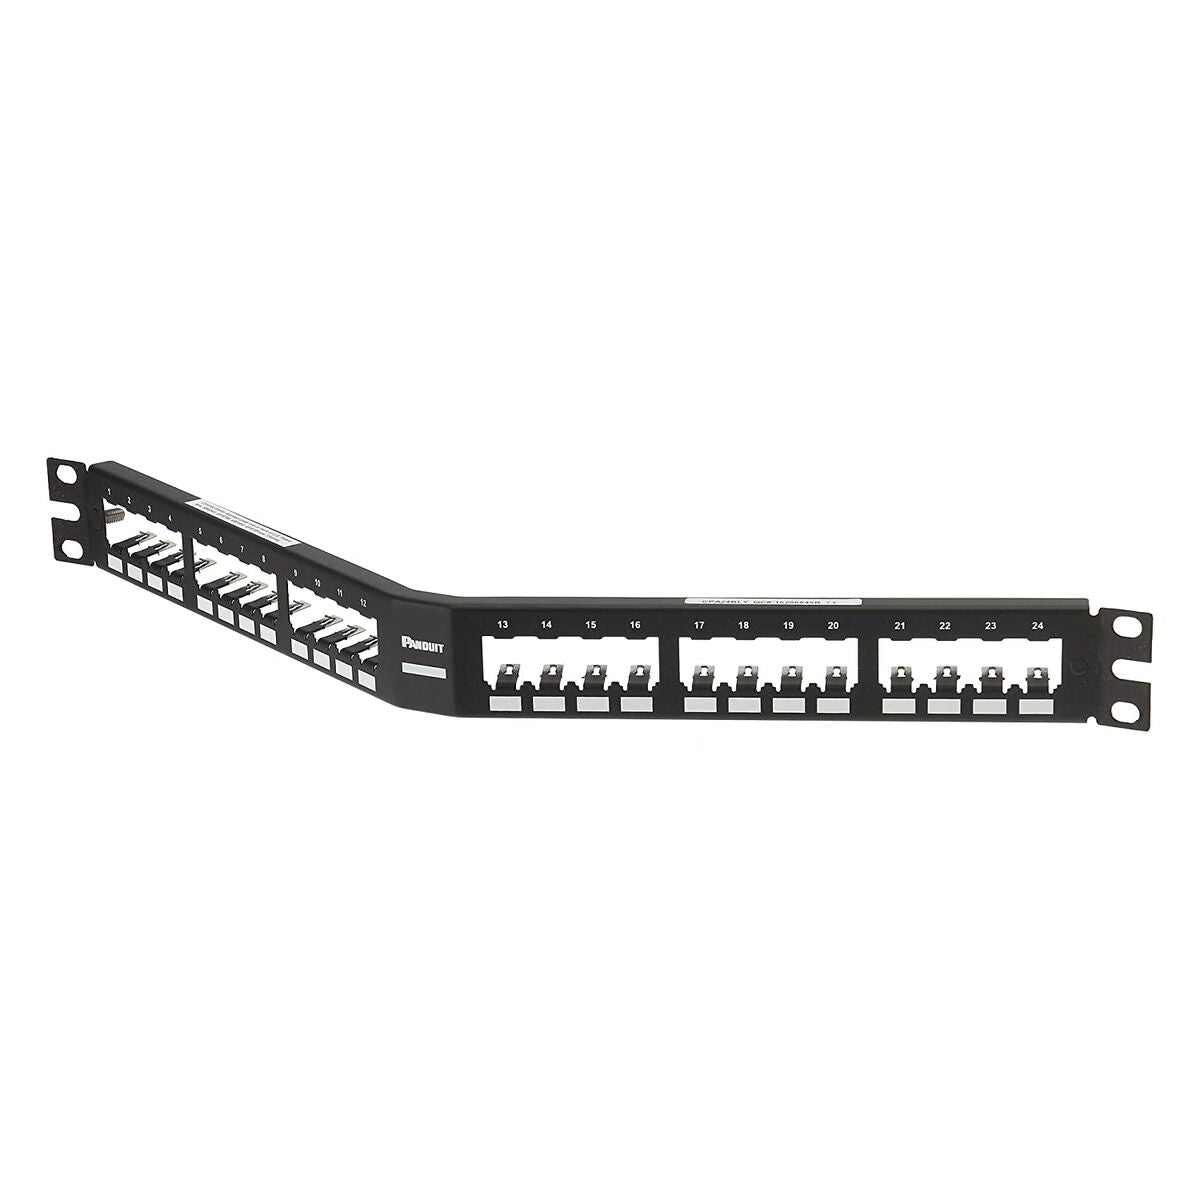 24-port UTP Category 6 Patch Panel Panduit CPA24BLY, Panduit, Computing, Cabling and connectivity, 24-port-utp-category-6-patch-panel-panduit-cpa24bly, Brand_Panduit, category-reference-2609, category-reference-2803, category-reference-2828, category-reference-t-19685, category-reference-t-7066, category-reference-t-7133, Condition_NEW, ferretería, networks/wiring, Price_100 - 200, RiotNook